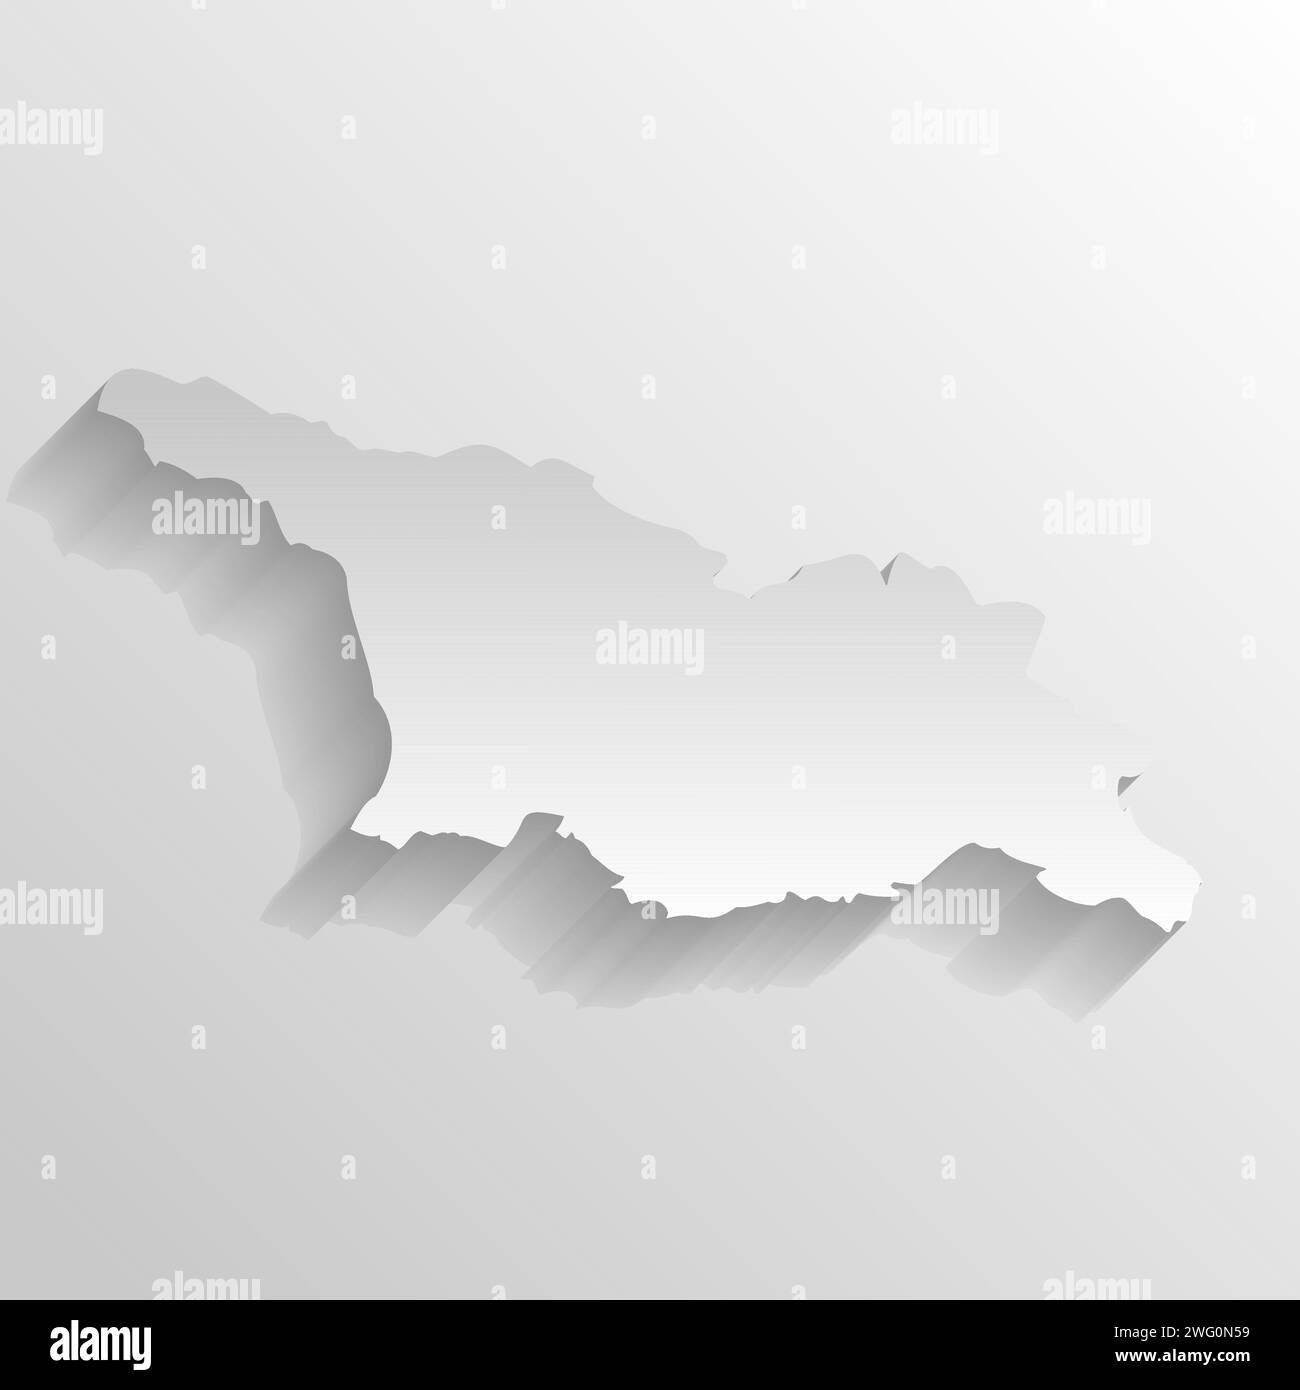 Georgia country silhouette. High detailed map. White country silhouette with dropped long shadow on beige background. Stock Vector